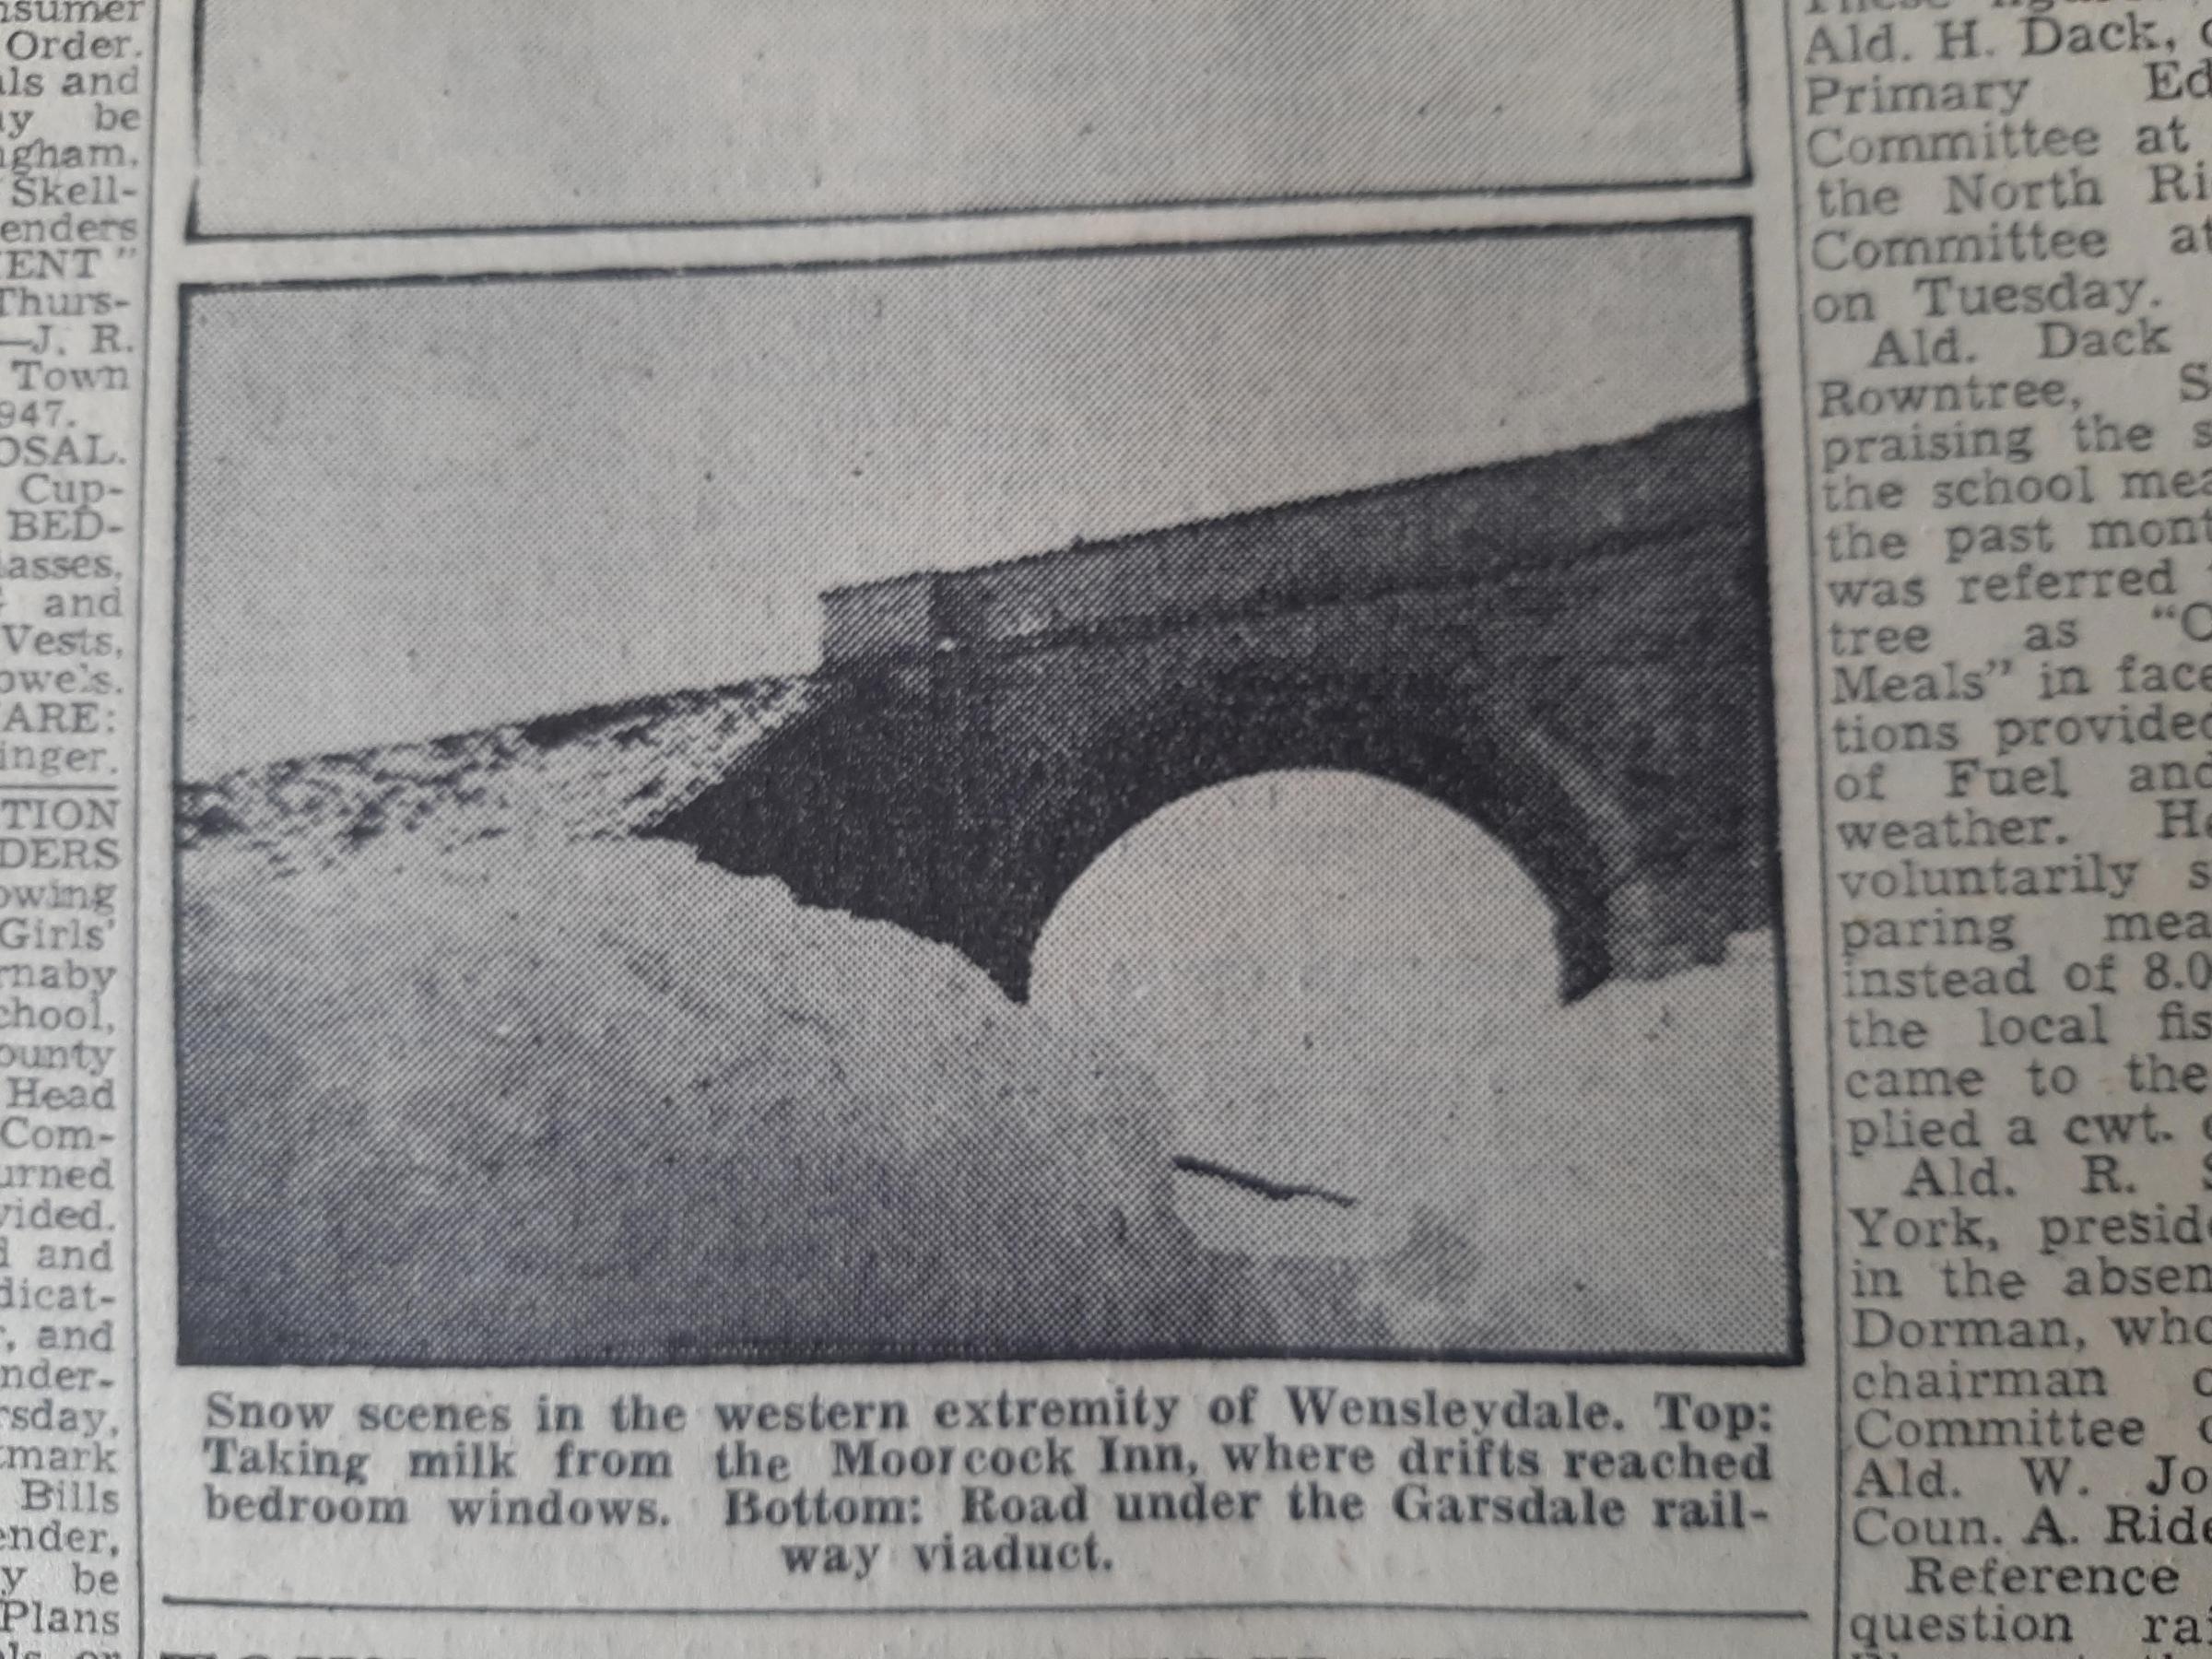 The road under Garsdale railway viaduct, pictured in the March 15, 1947 edition